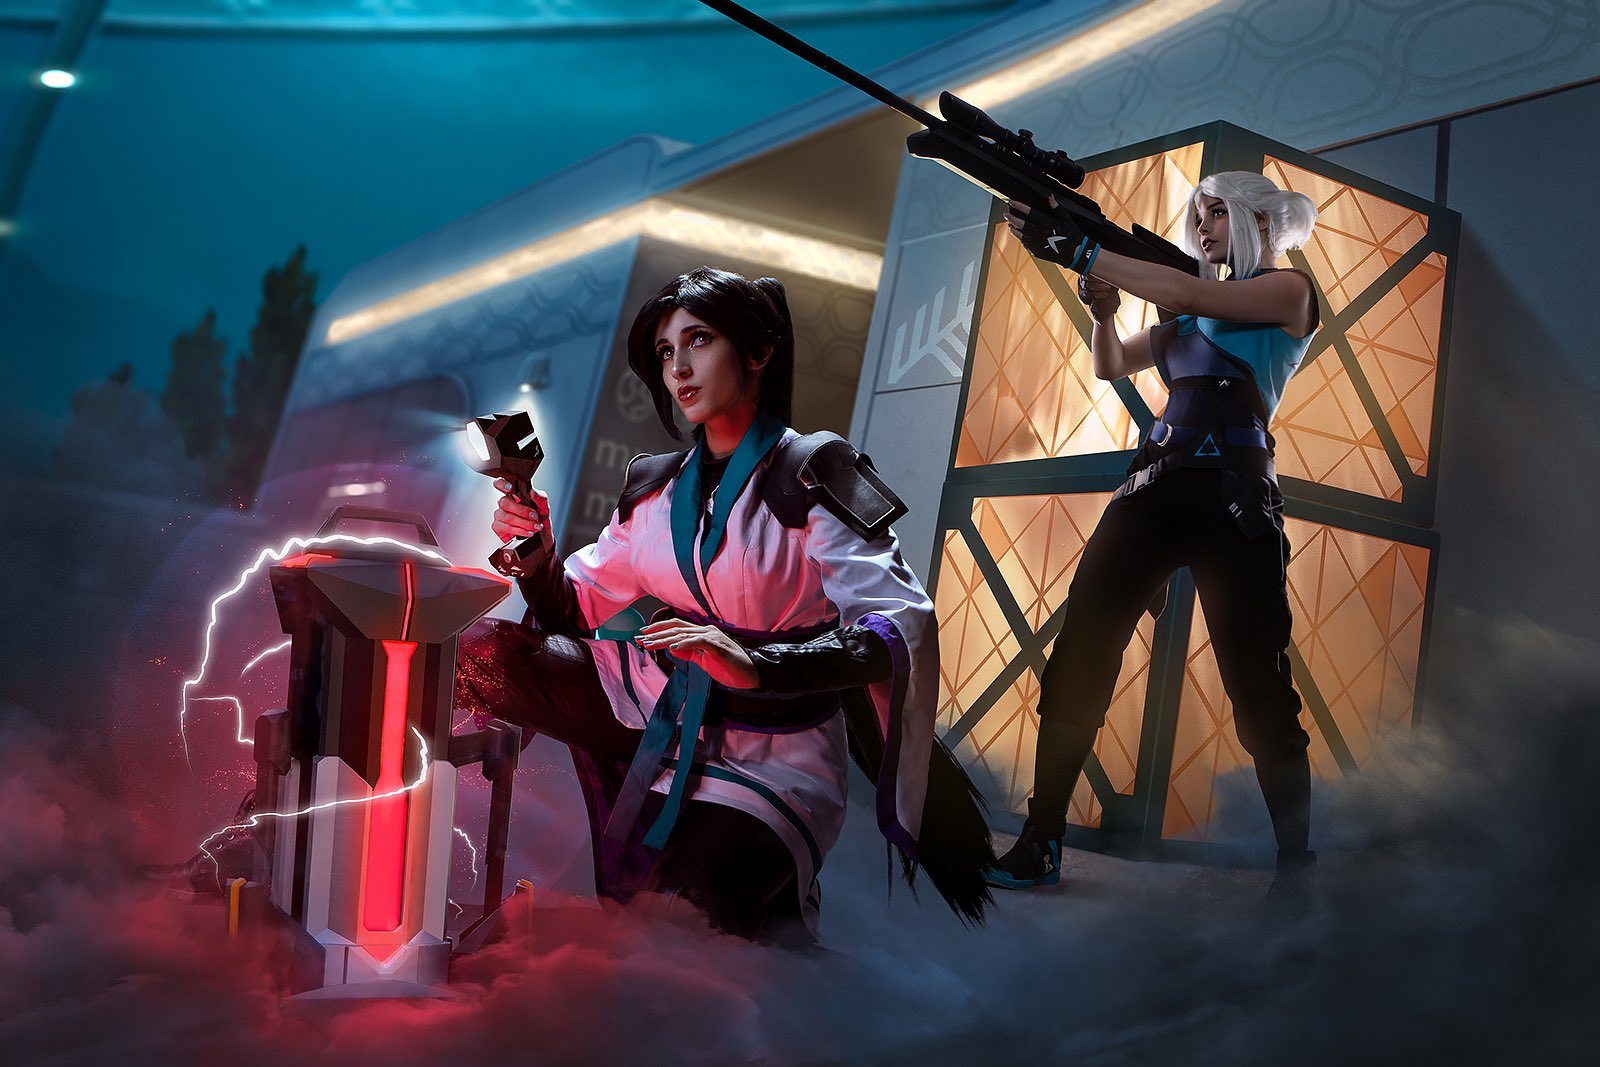 Valorant Art featuring two women with guns